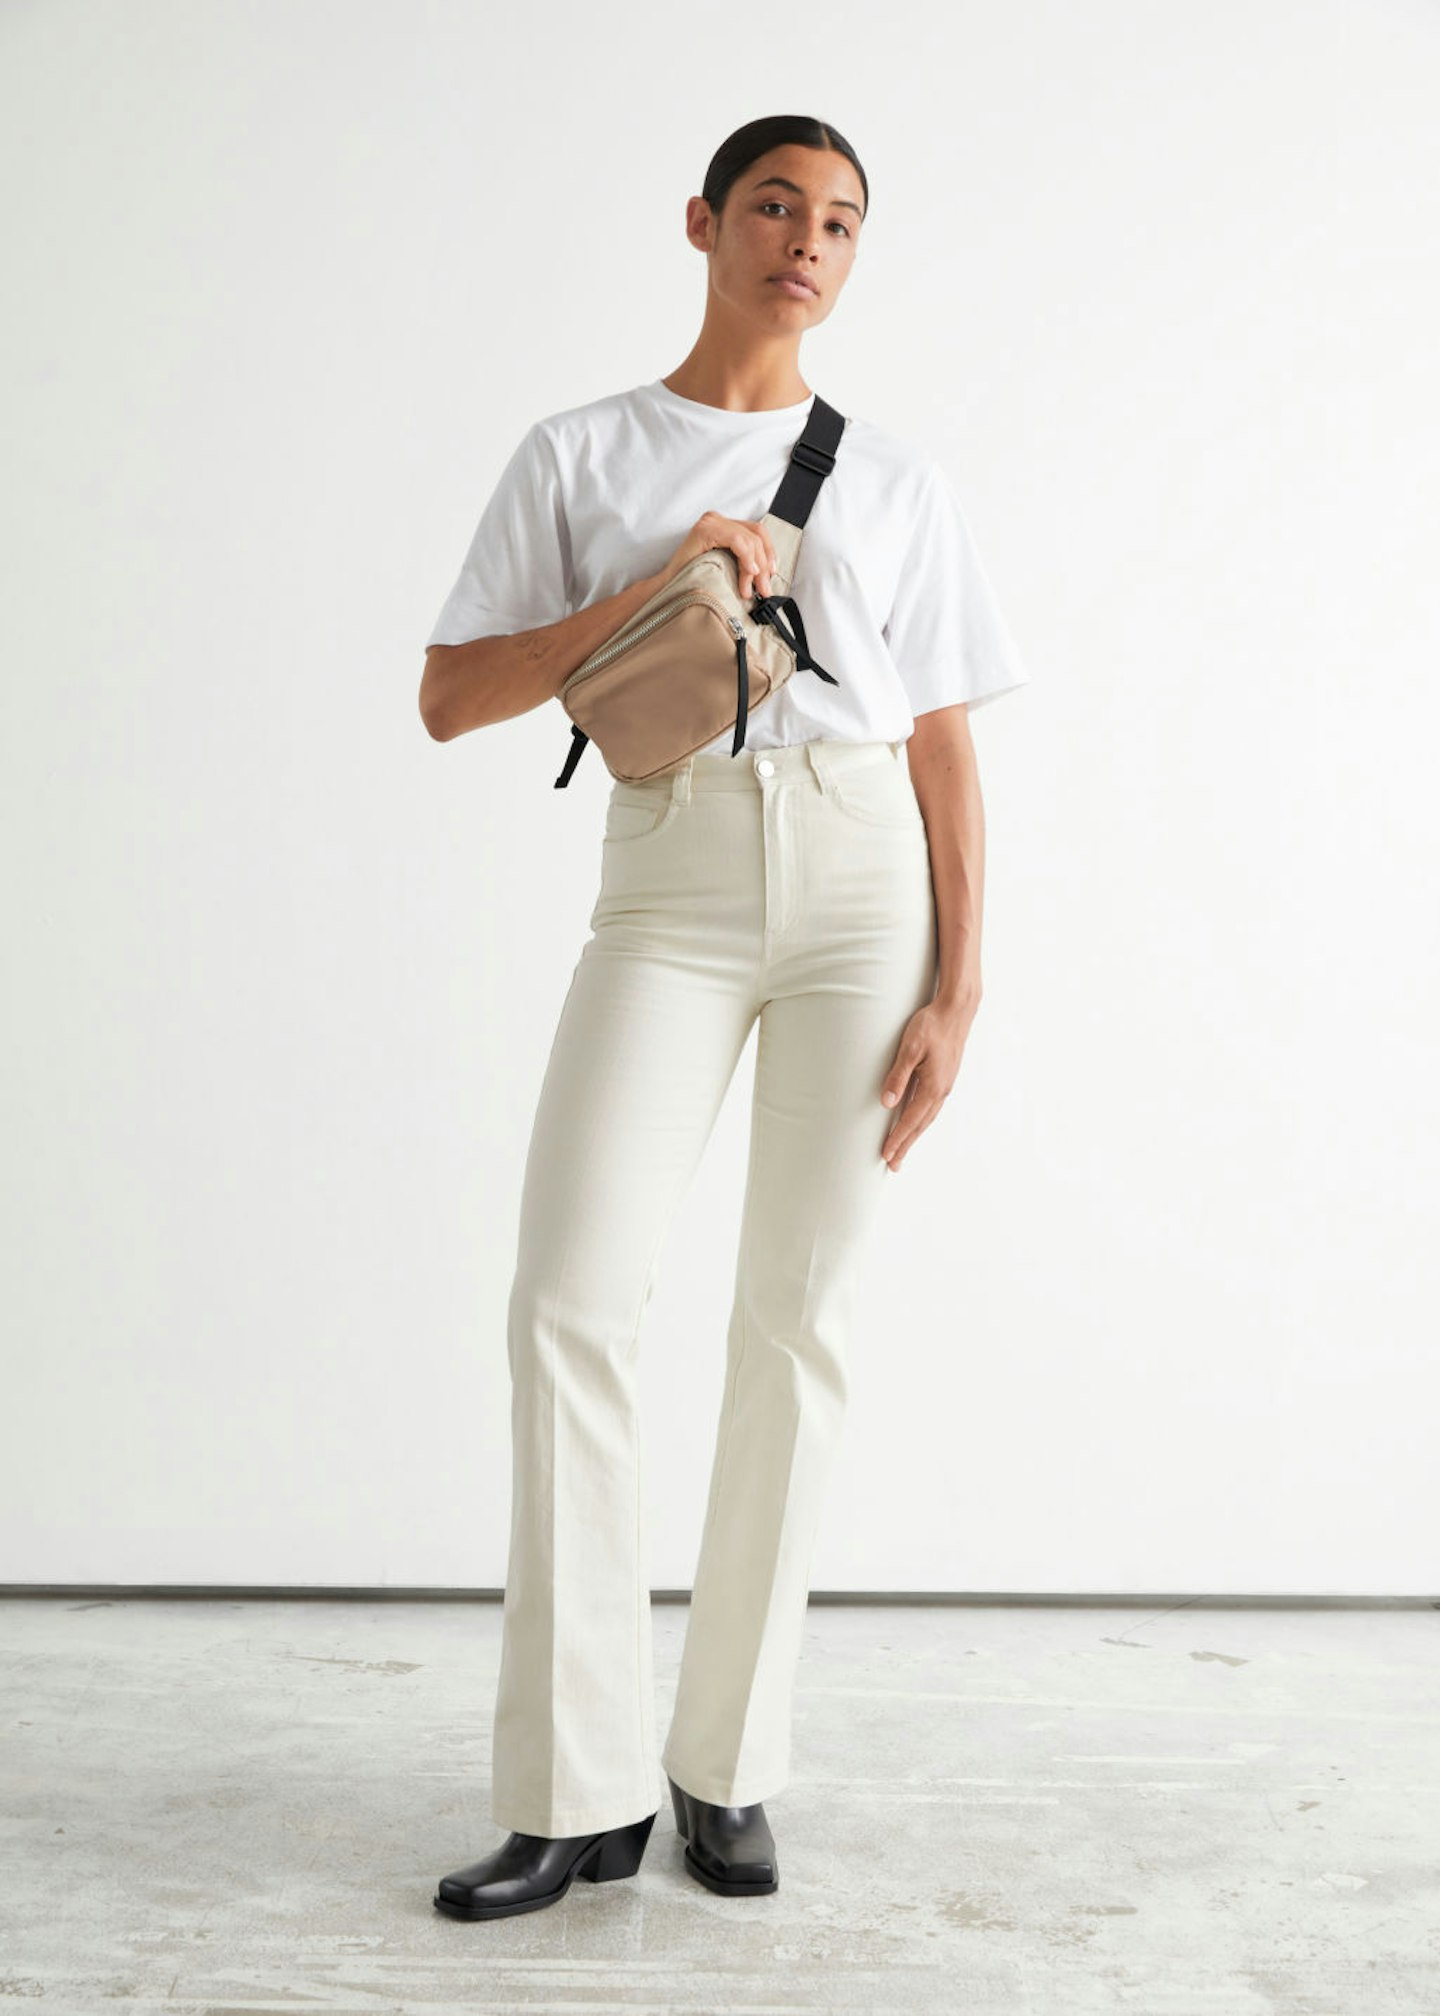 & Other Stories, Flared Cotton Trousers, £65